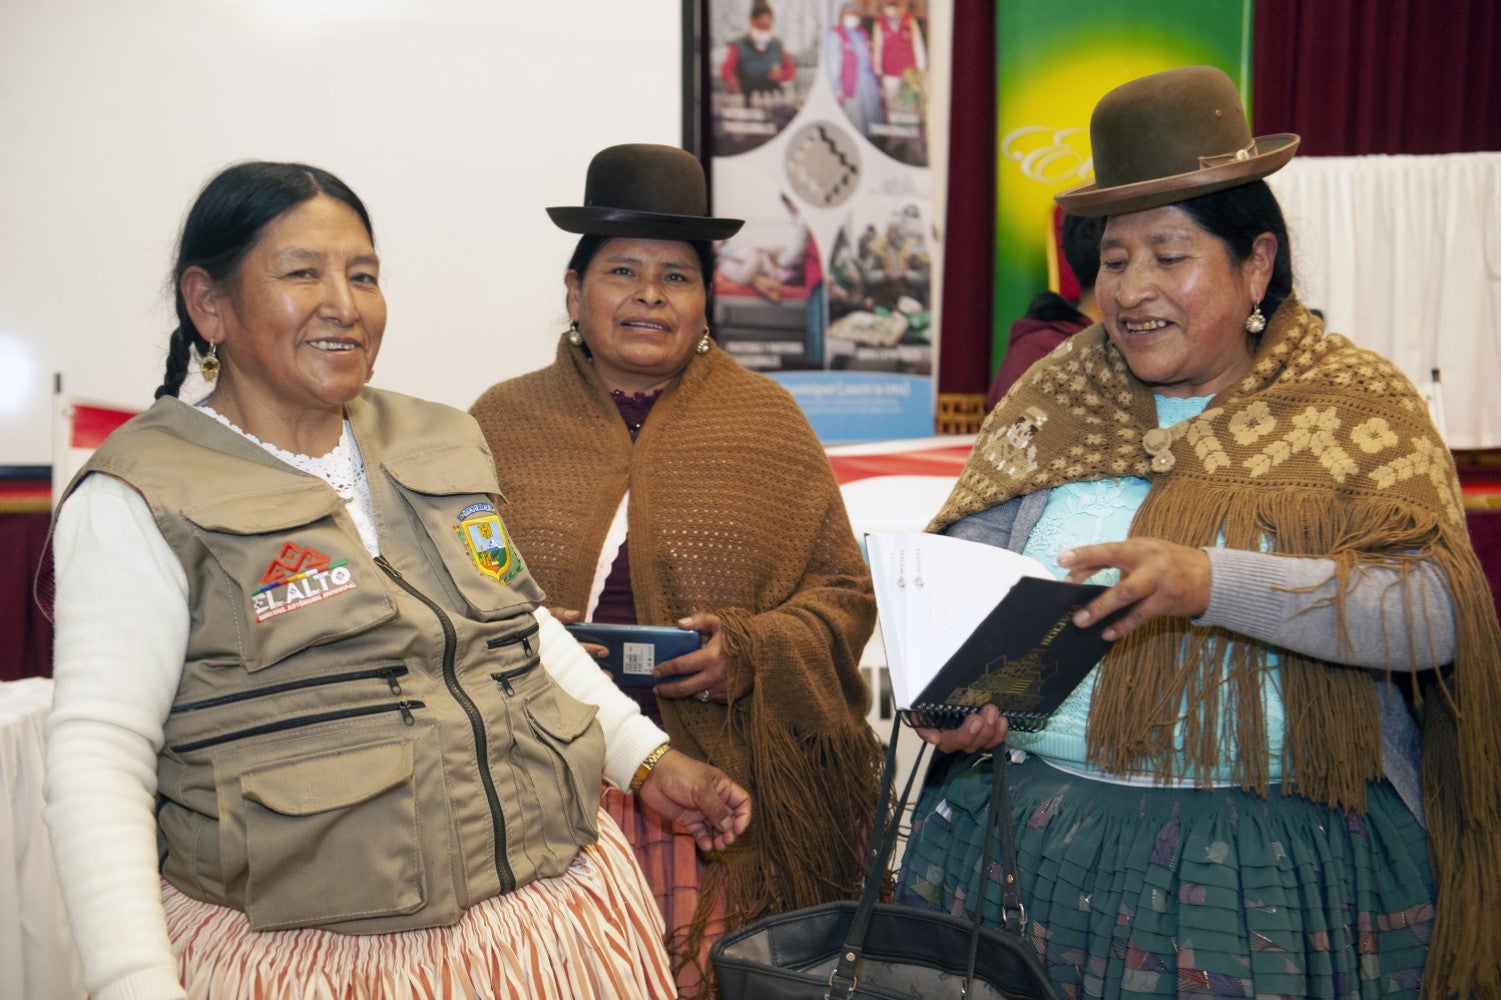 Ana Choque (left), head of traditional midwives in the municipality of El Alto, Bolivia, and members of the midwives’ association of El Alto, during a PAHO-hosted session to update their knowledge and improve interventions in sexual and reproductive health. 